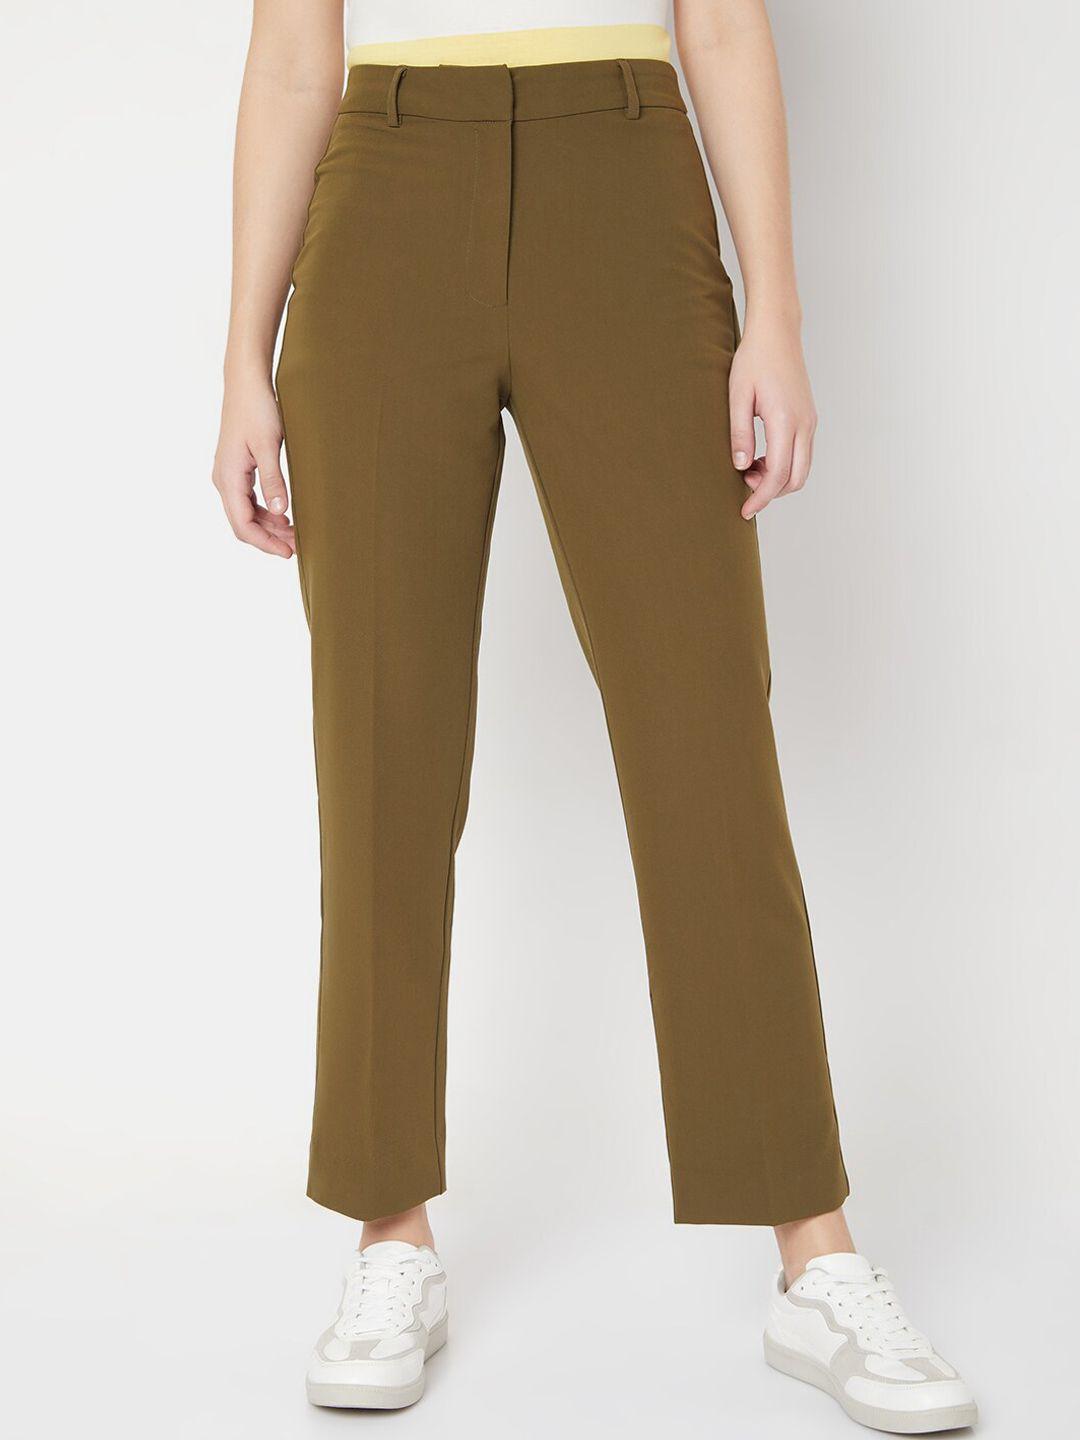 vero-moda-women-olive-green-straight-fit-high-rise-culottes-trousers